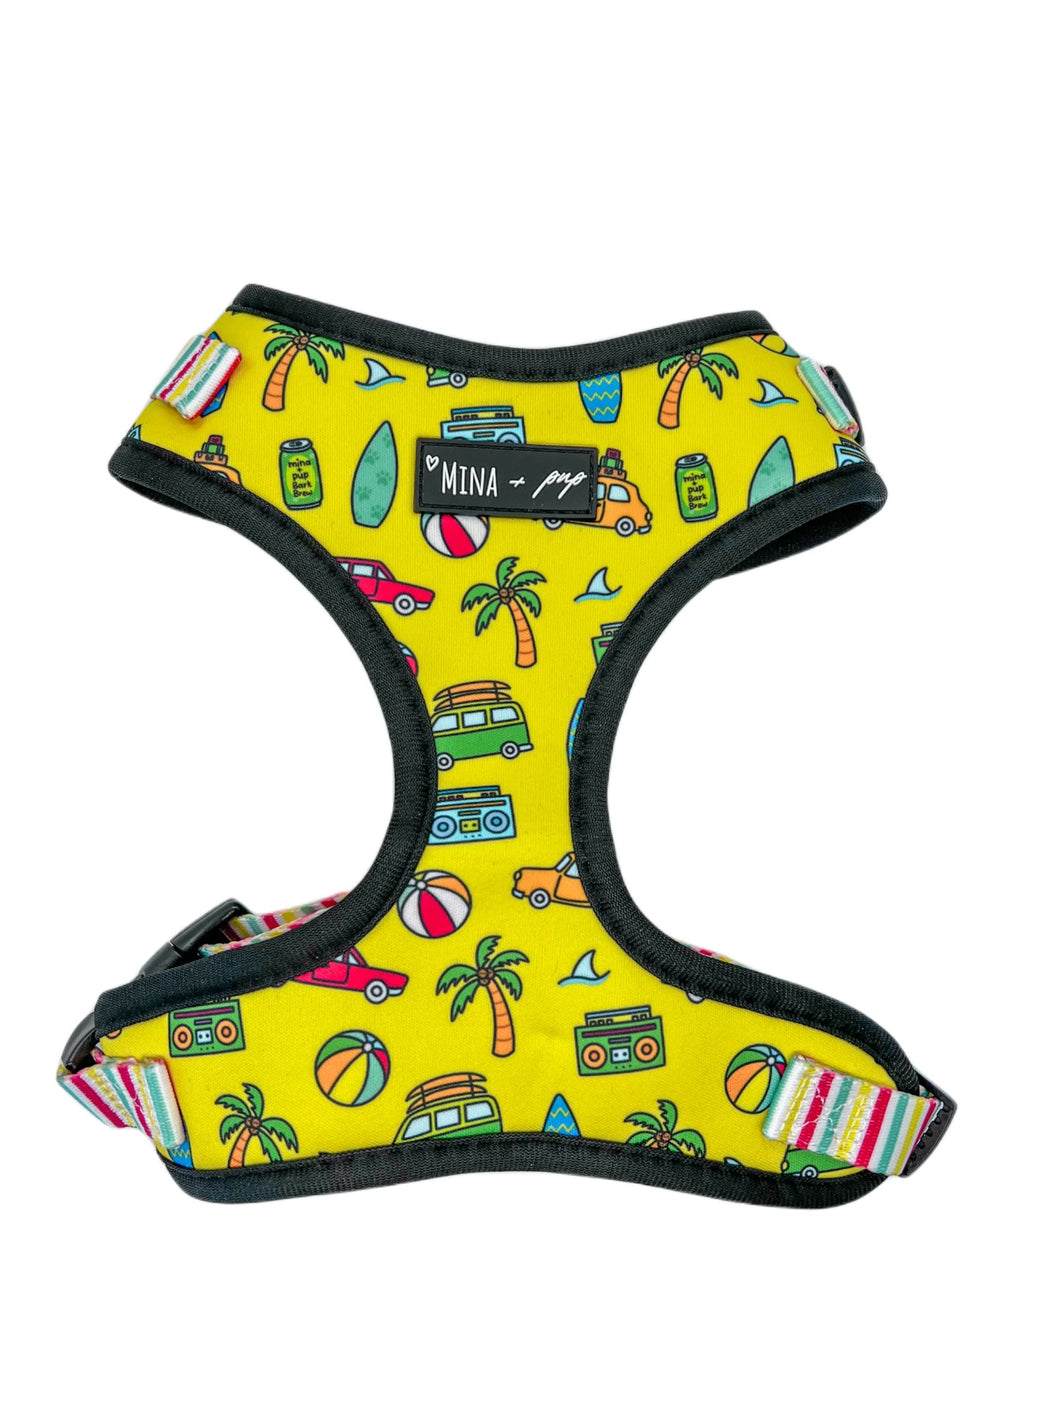 The Beach Bum Adjustable Dog or Cat Harness